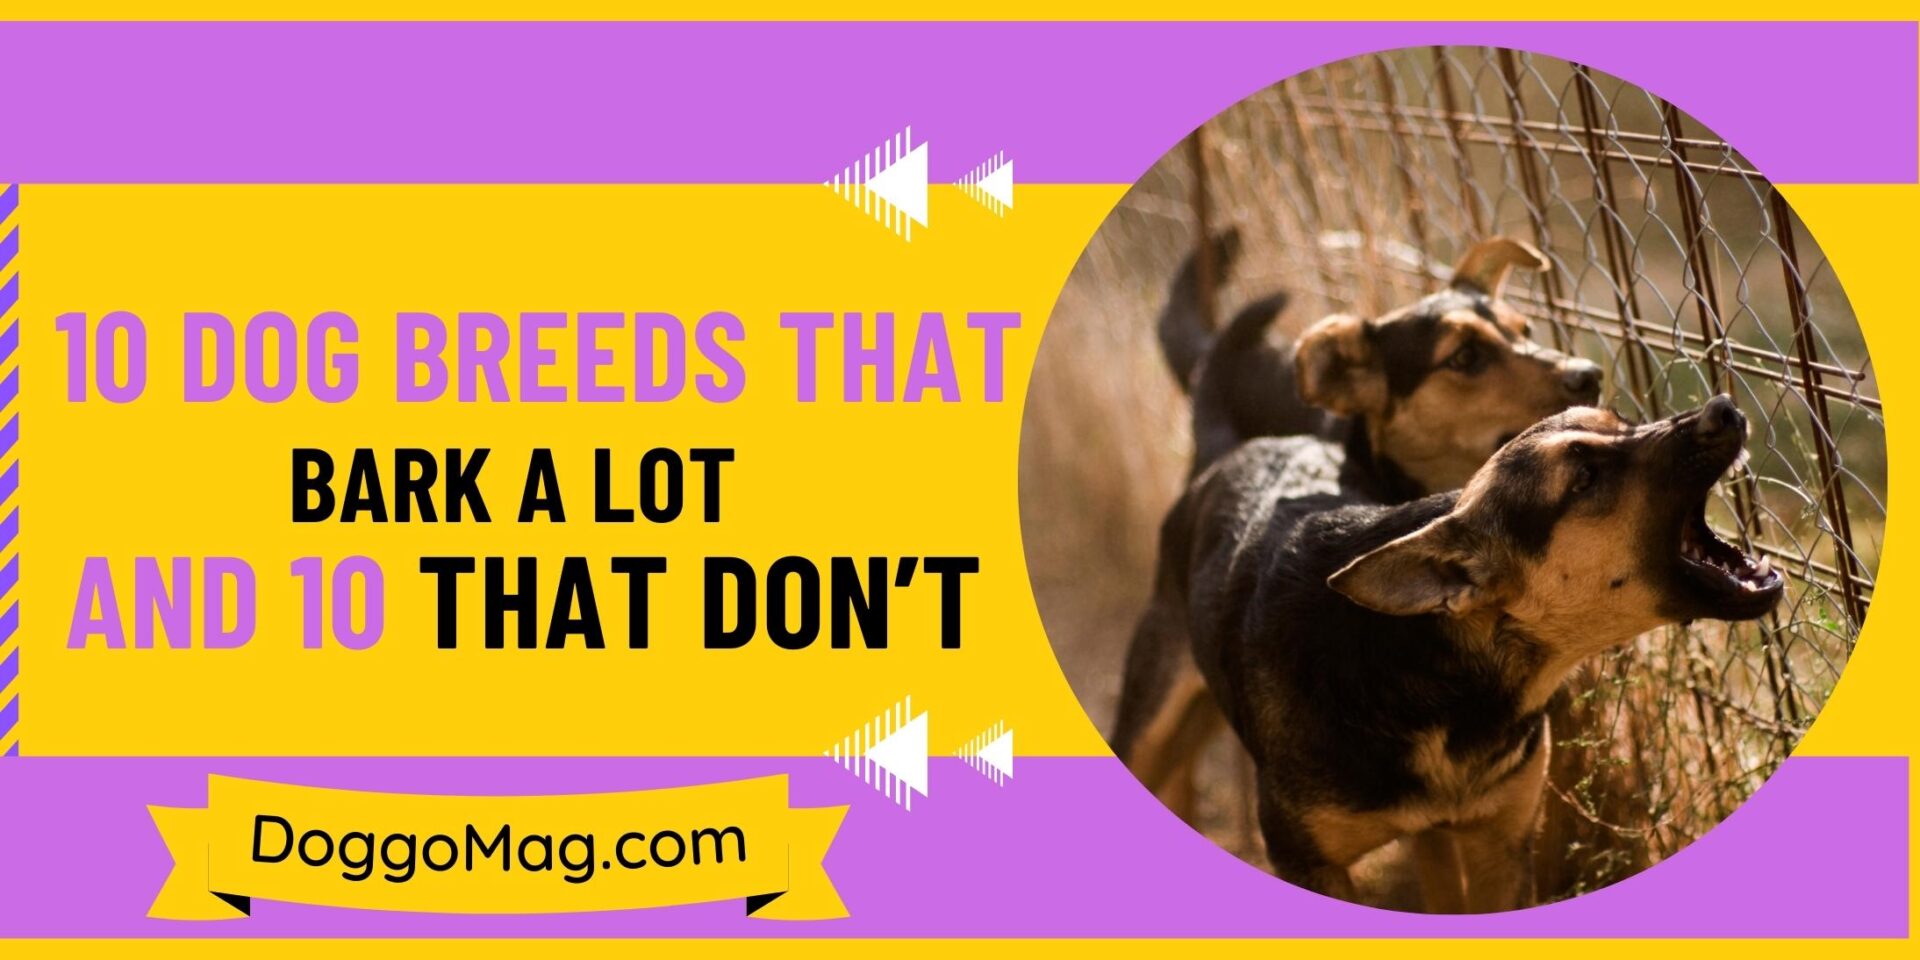 Dog Breeds That Bark A Lot And That Don’t